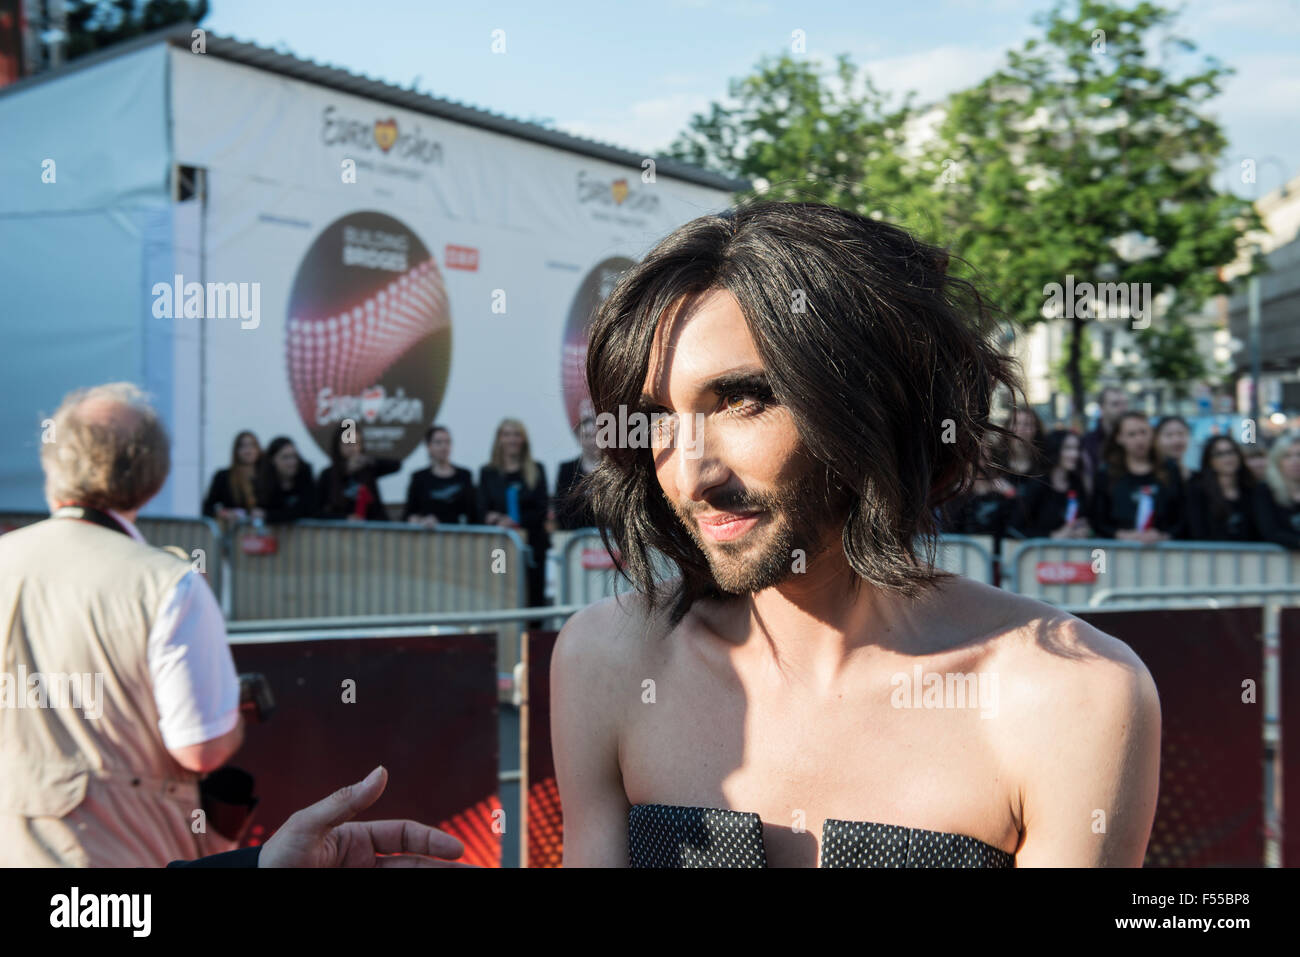 Vienna, Austria. Sunday, 17th May 2015. Conchita, winner of the ESC 2014, at the Red Carpet Event for the ESC 2015. Stock Photo